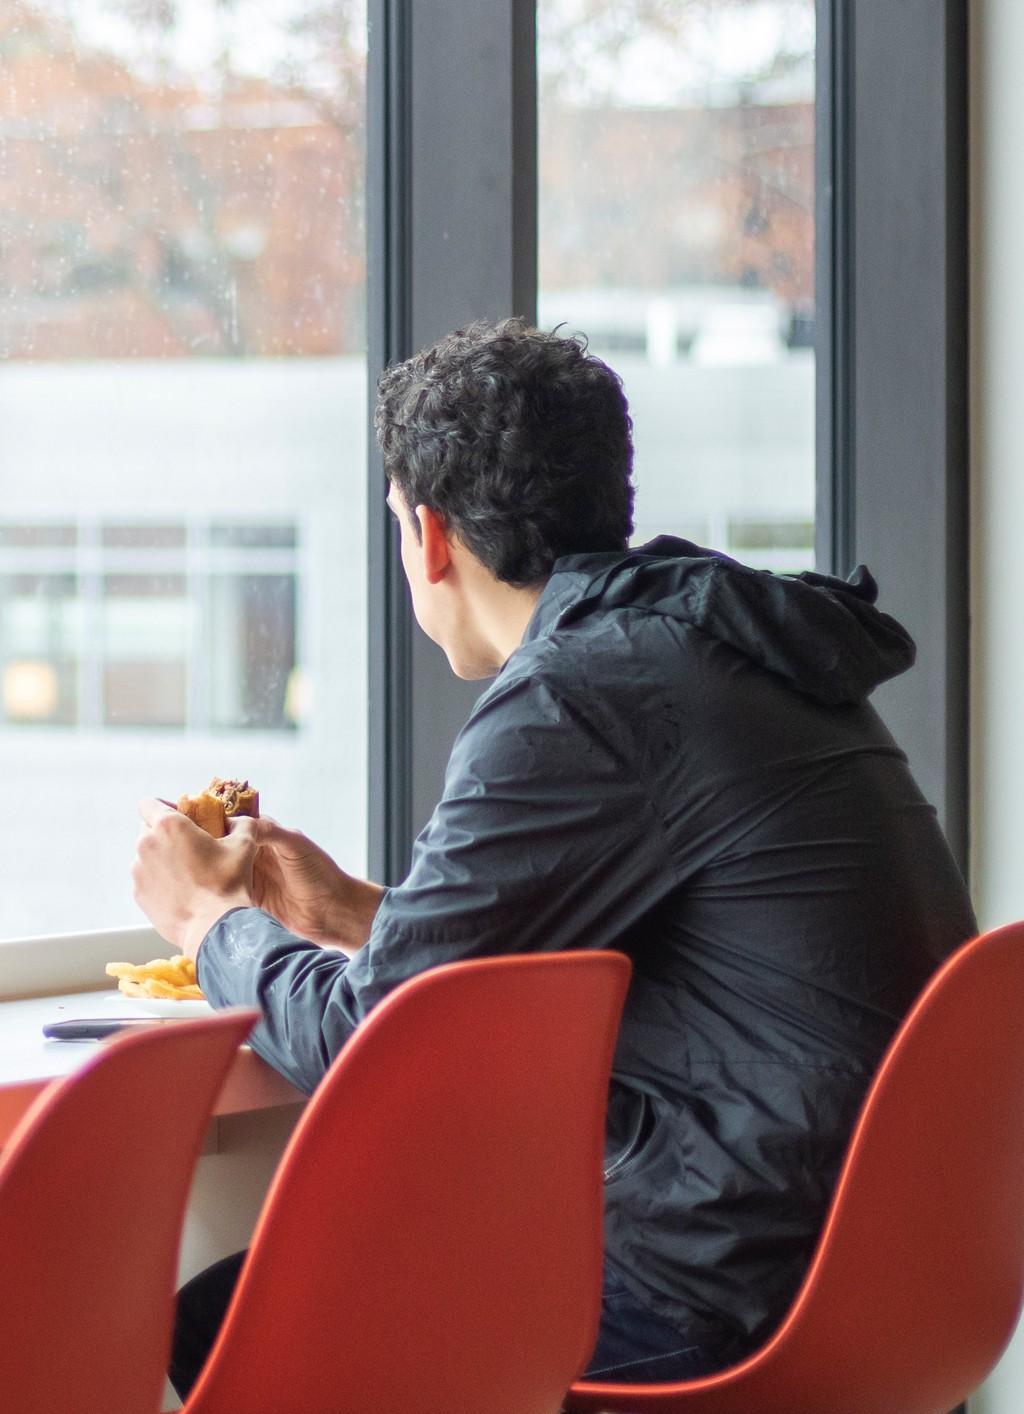 A student eating a hamburger while looking out large glass windows